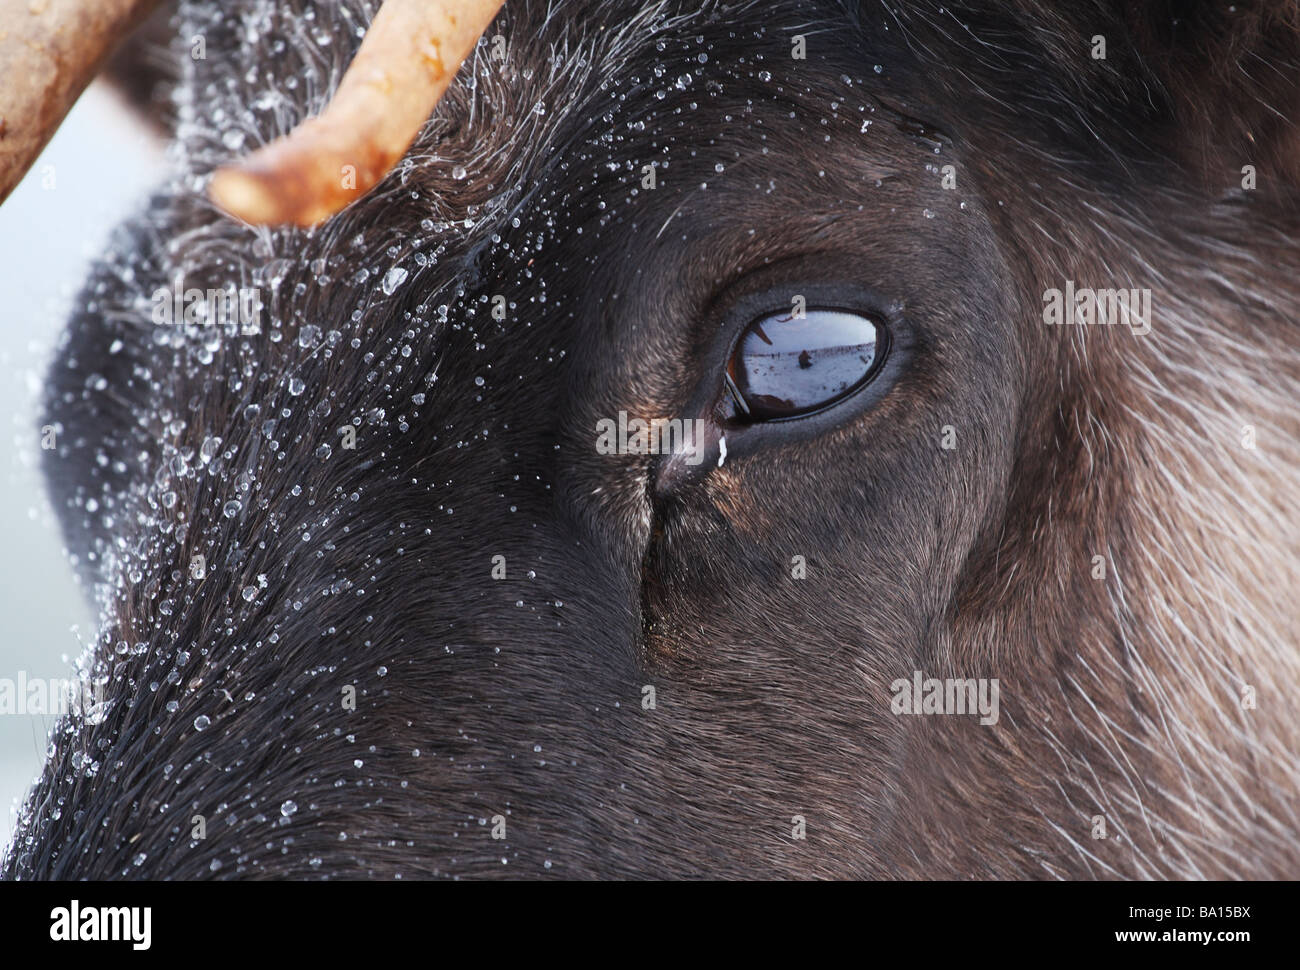 Close up of Reindeer eye in winter snow Stock Photo